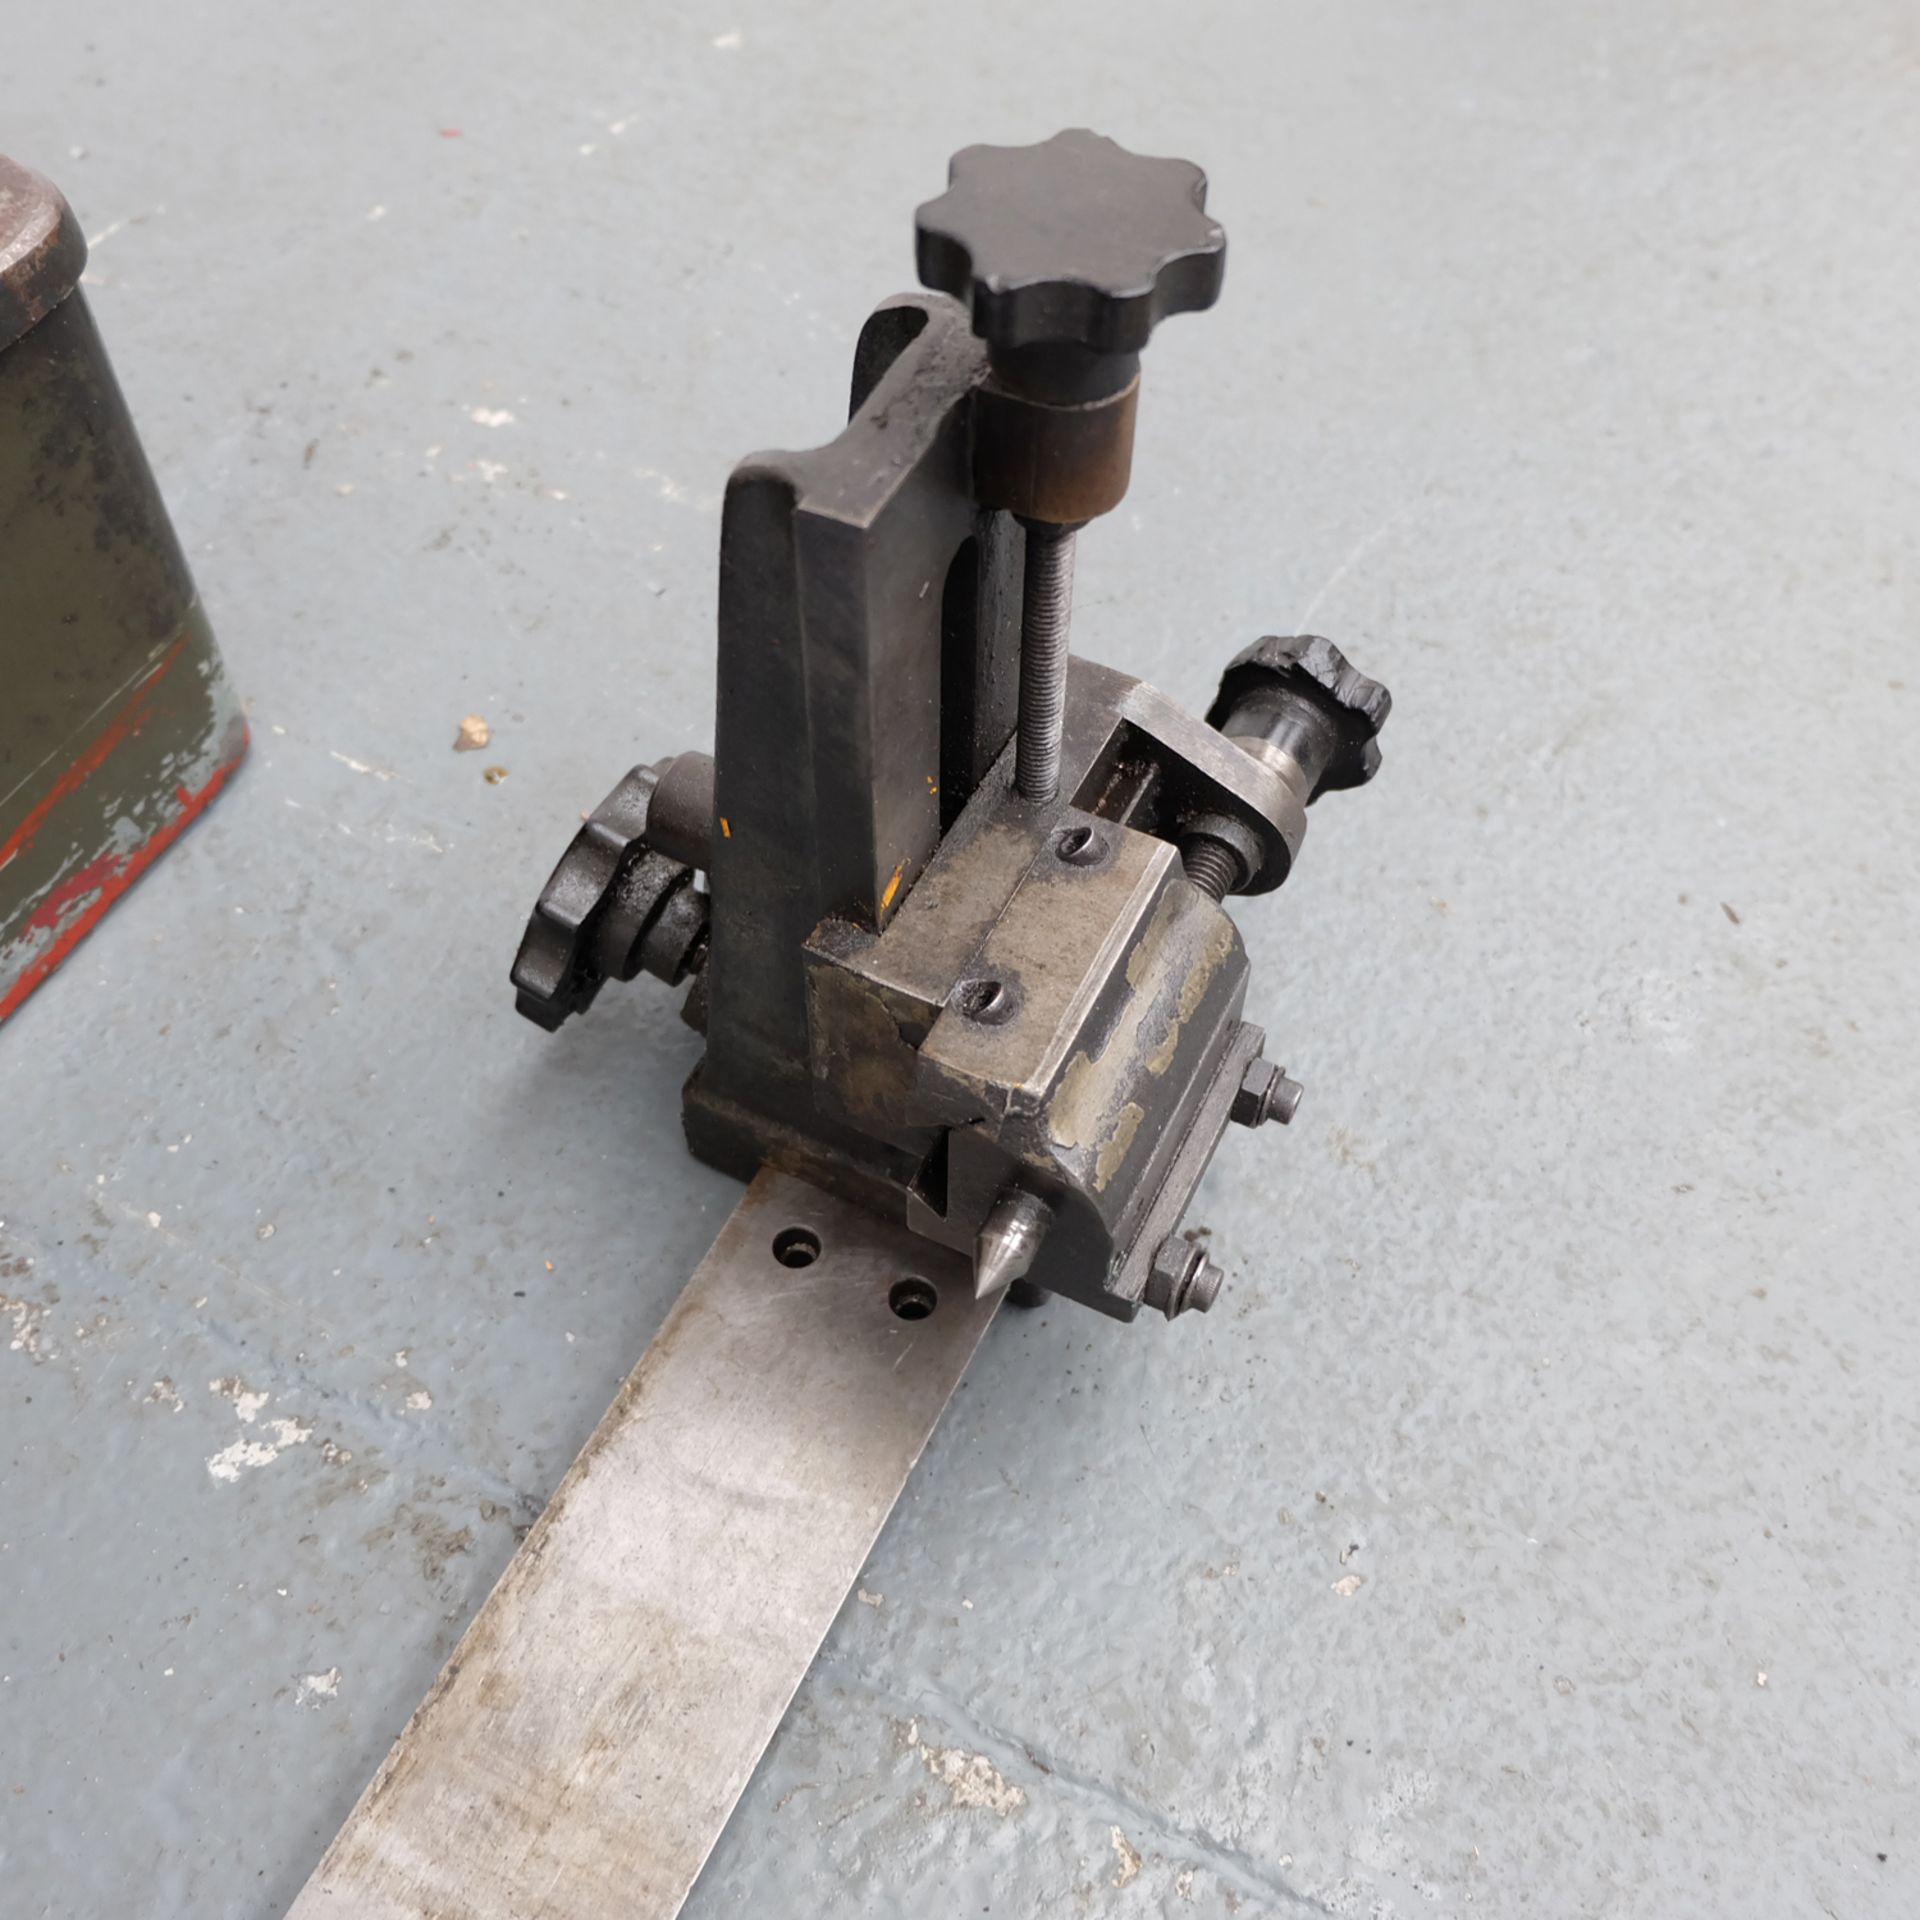 Hepworth Hydraulic Copying Attachment for Colchester Lathe. - Image 3 of 11